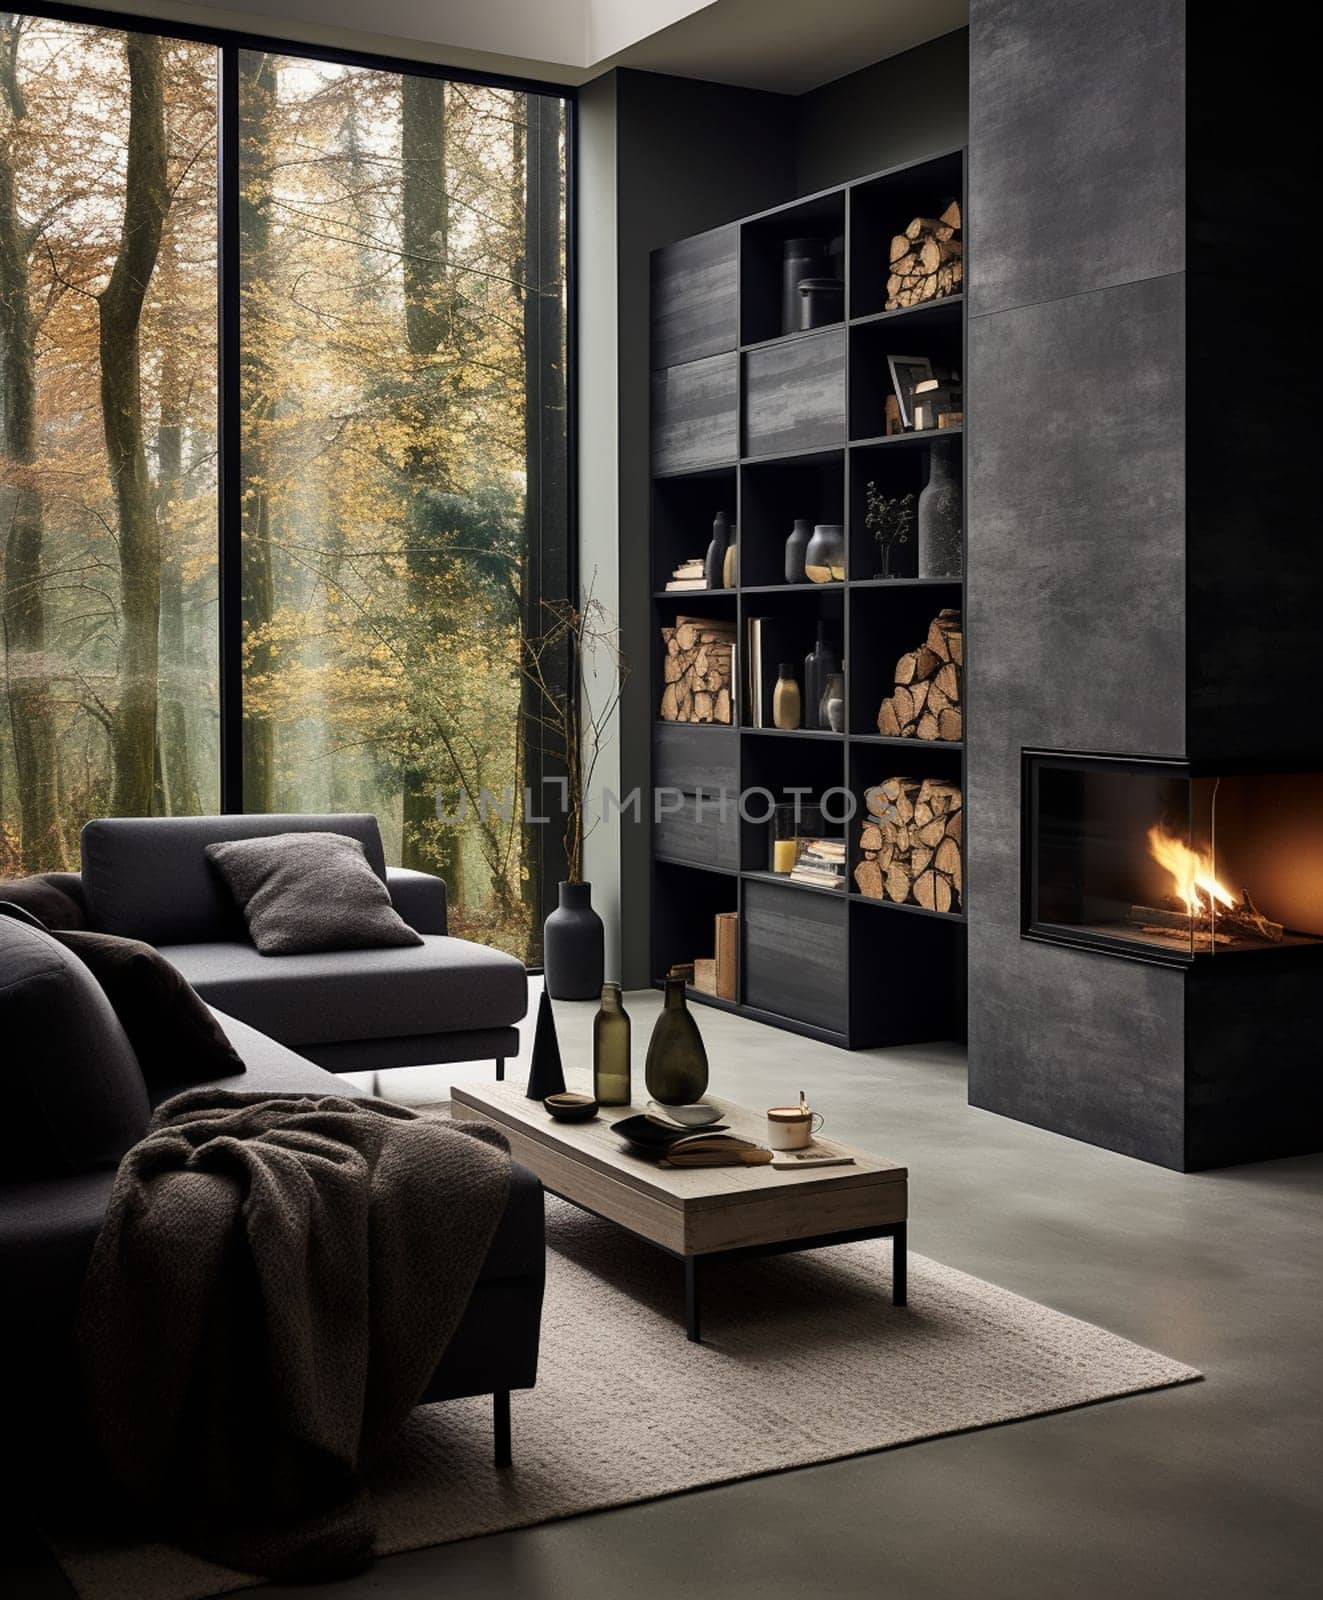 Dark living room loft with fireplace, industrial style, 3d render.